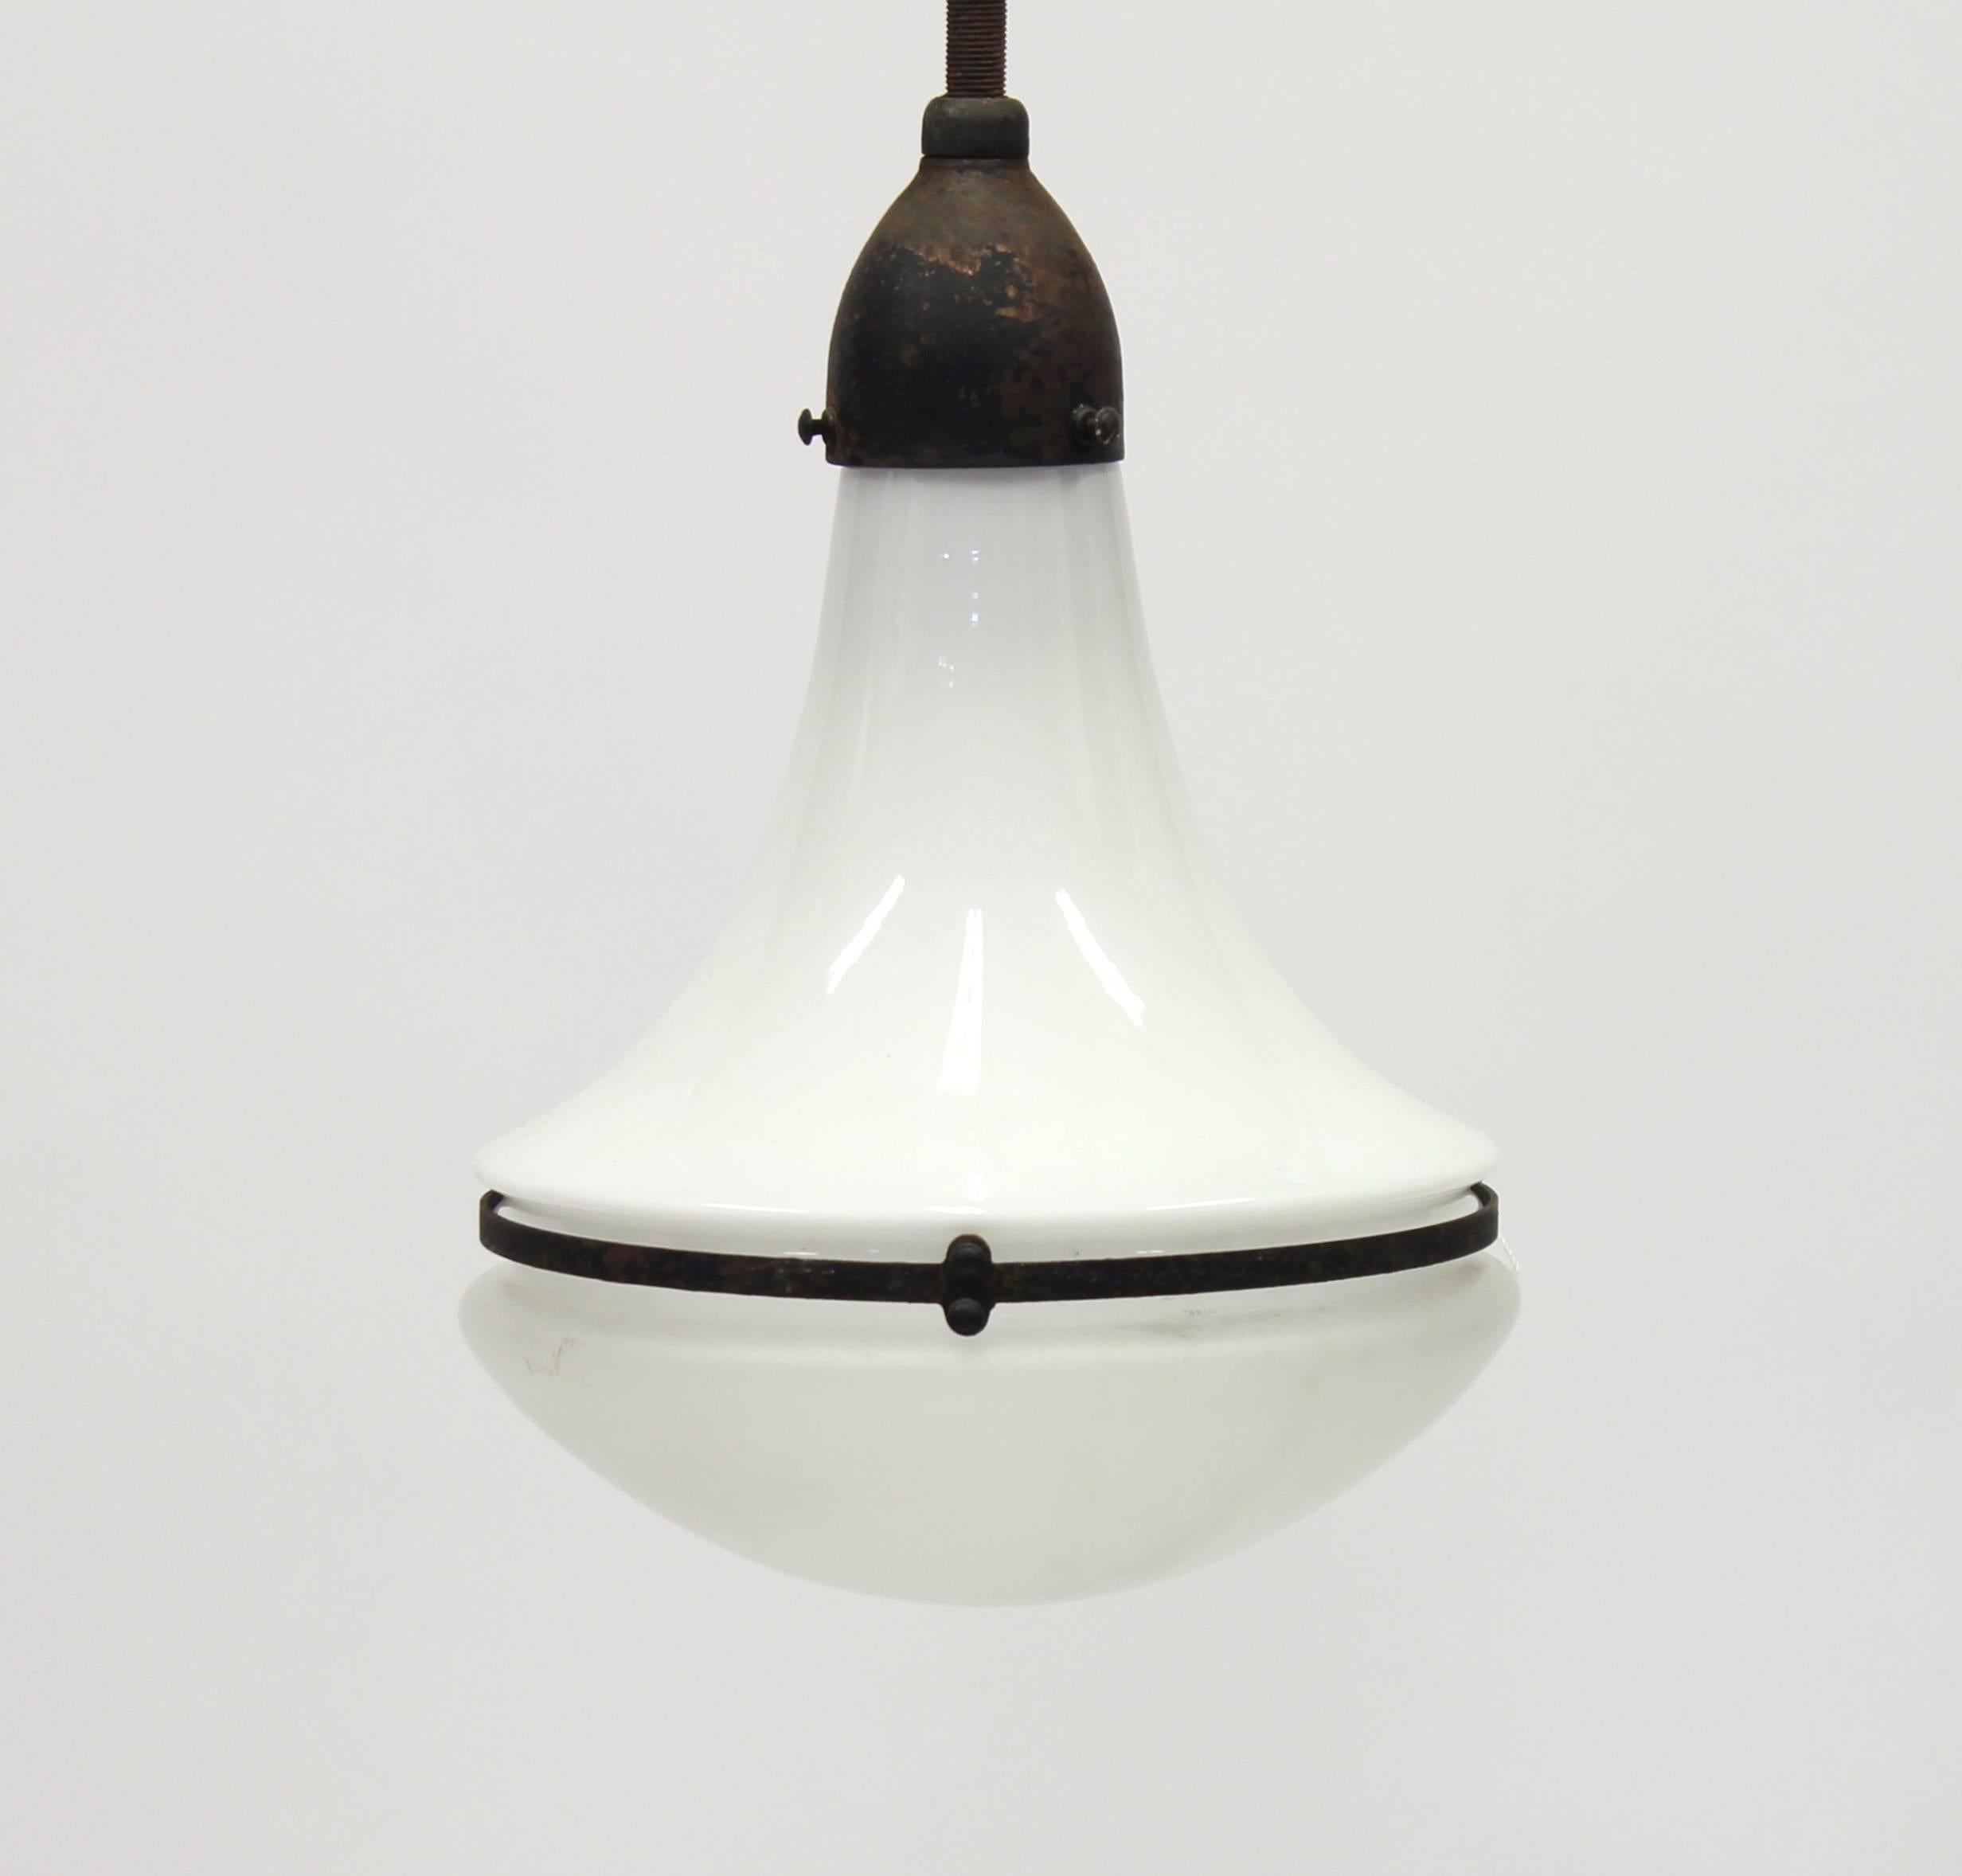 This Peter Behrens design piece from circa 1910 was manufactured in Germany by AEG. An opaline white glass shade is held in place by a bell-shaped metallic attachment and stem, encasing the bulb for the diffusion of the light. The referred height